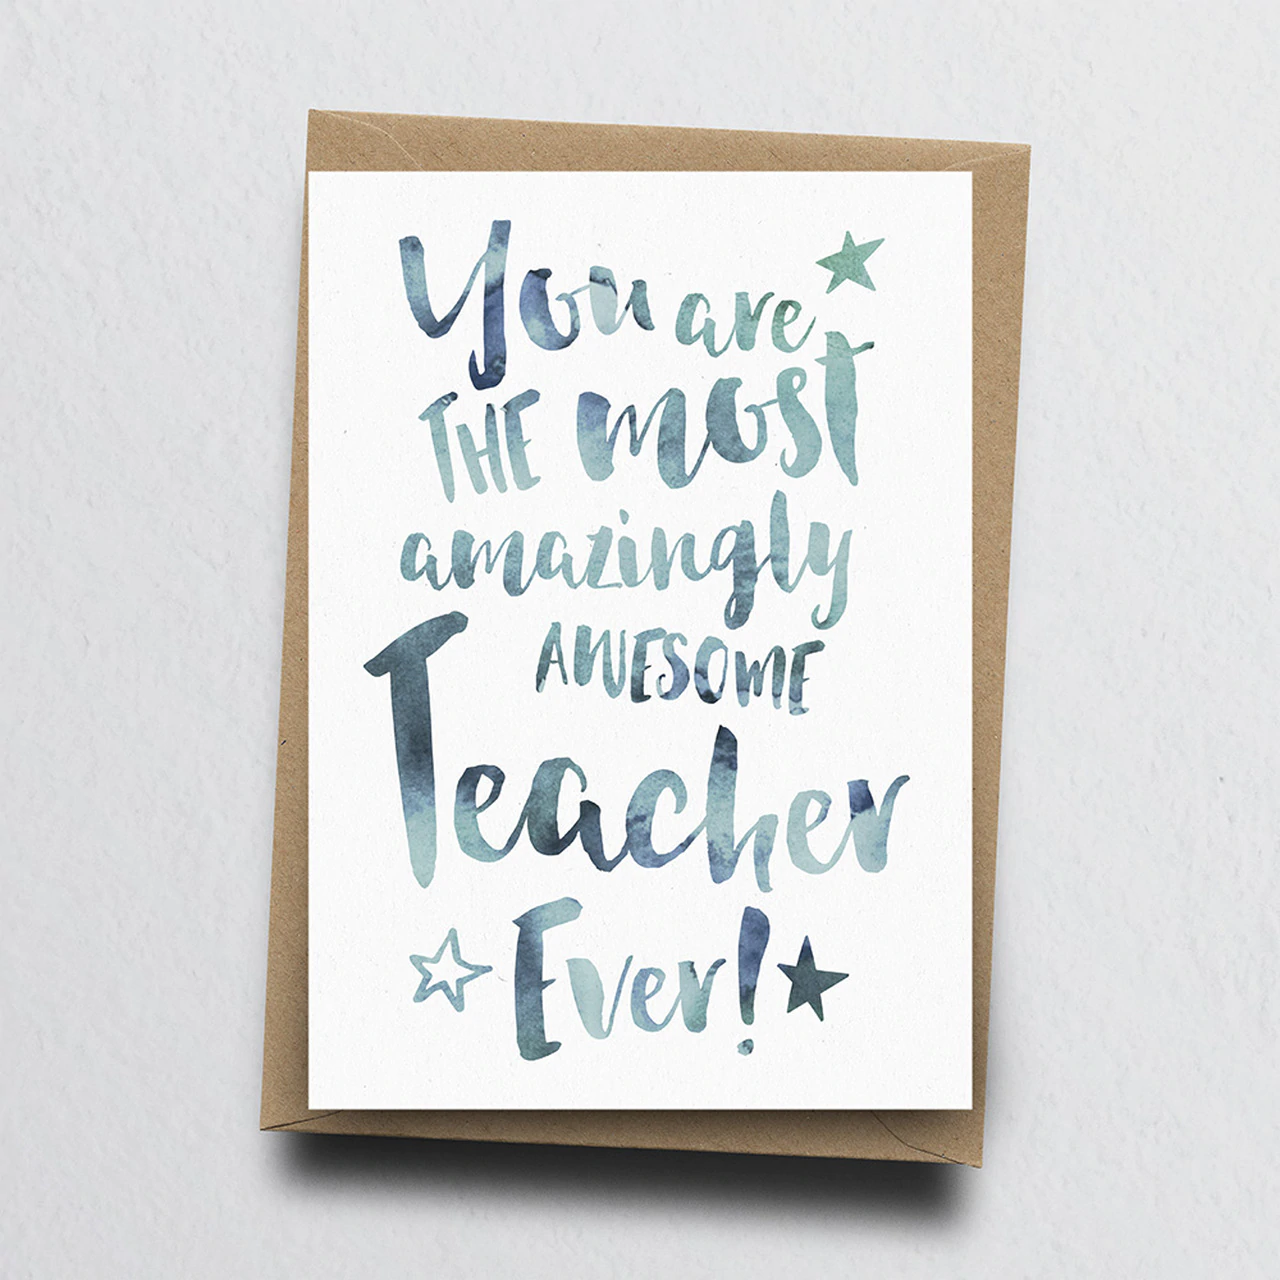 The-Most-Amazingly-Awesome-Teacher-Greeting-Card-by-Dig-The-Earth-1000__14214.1592503155